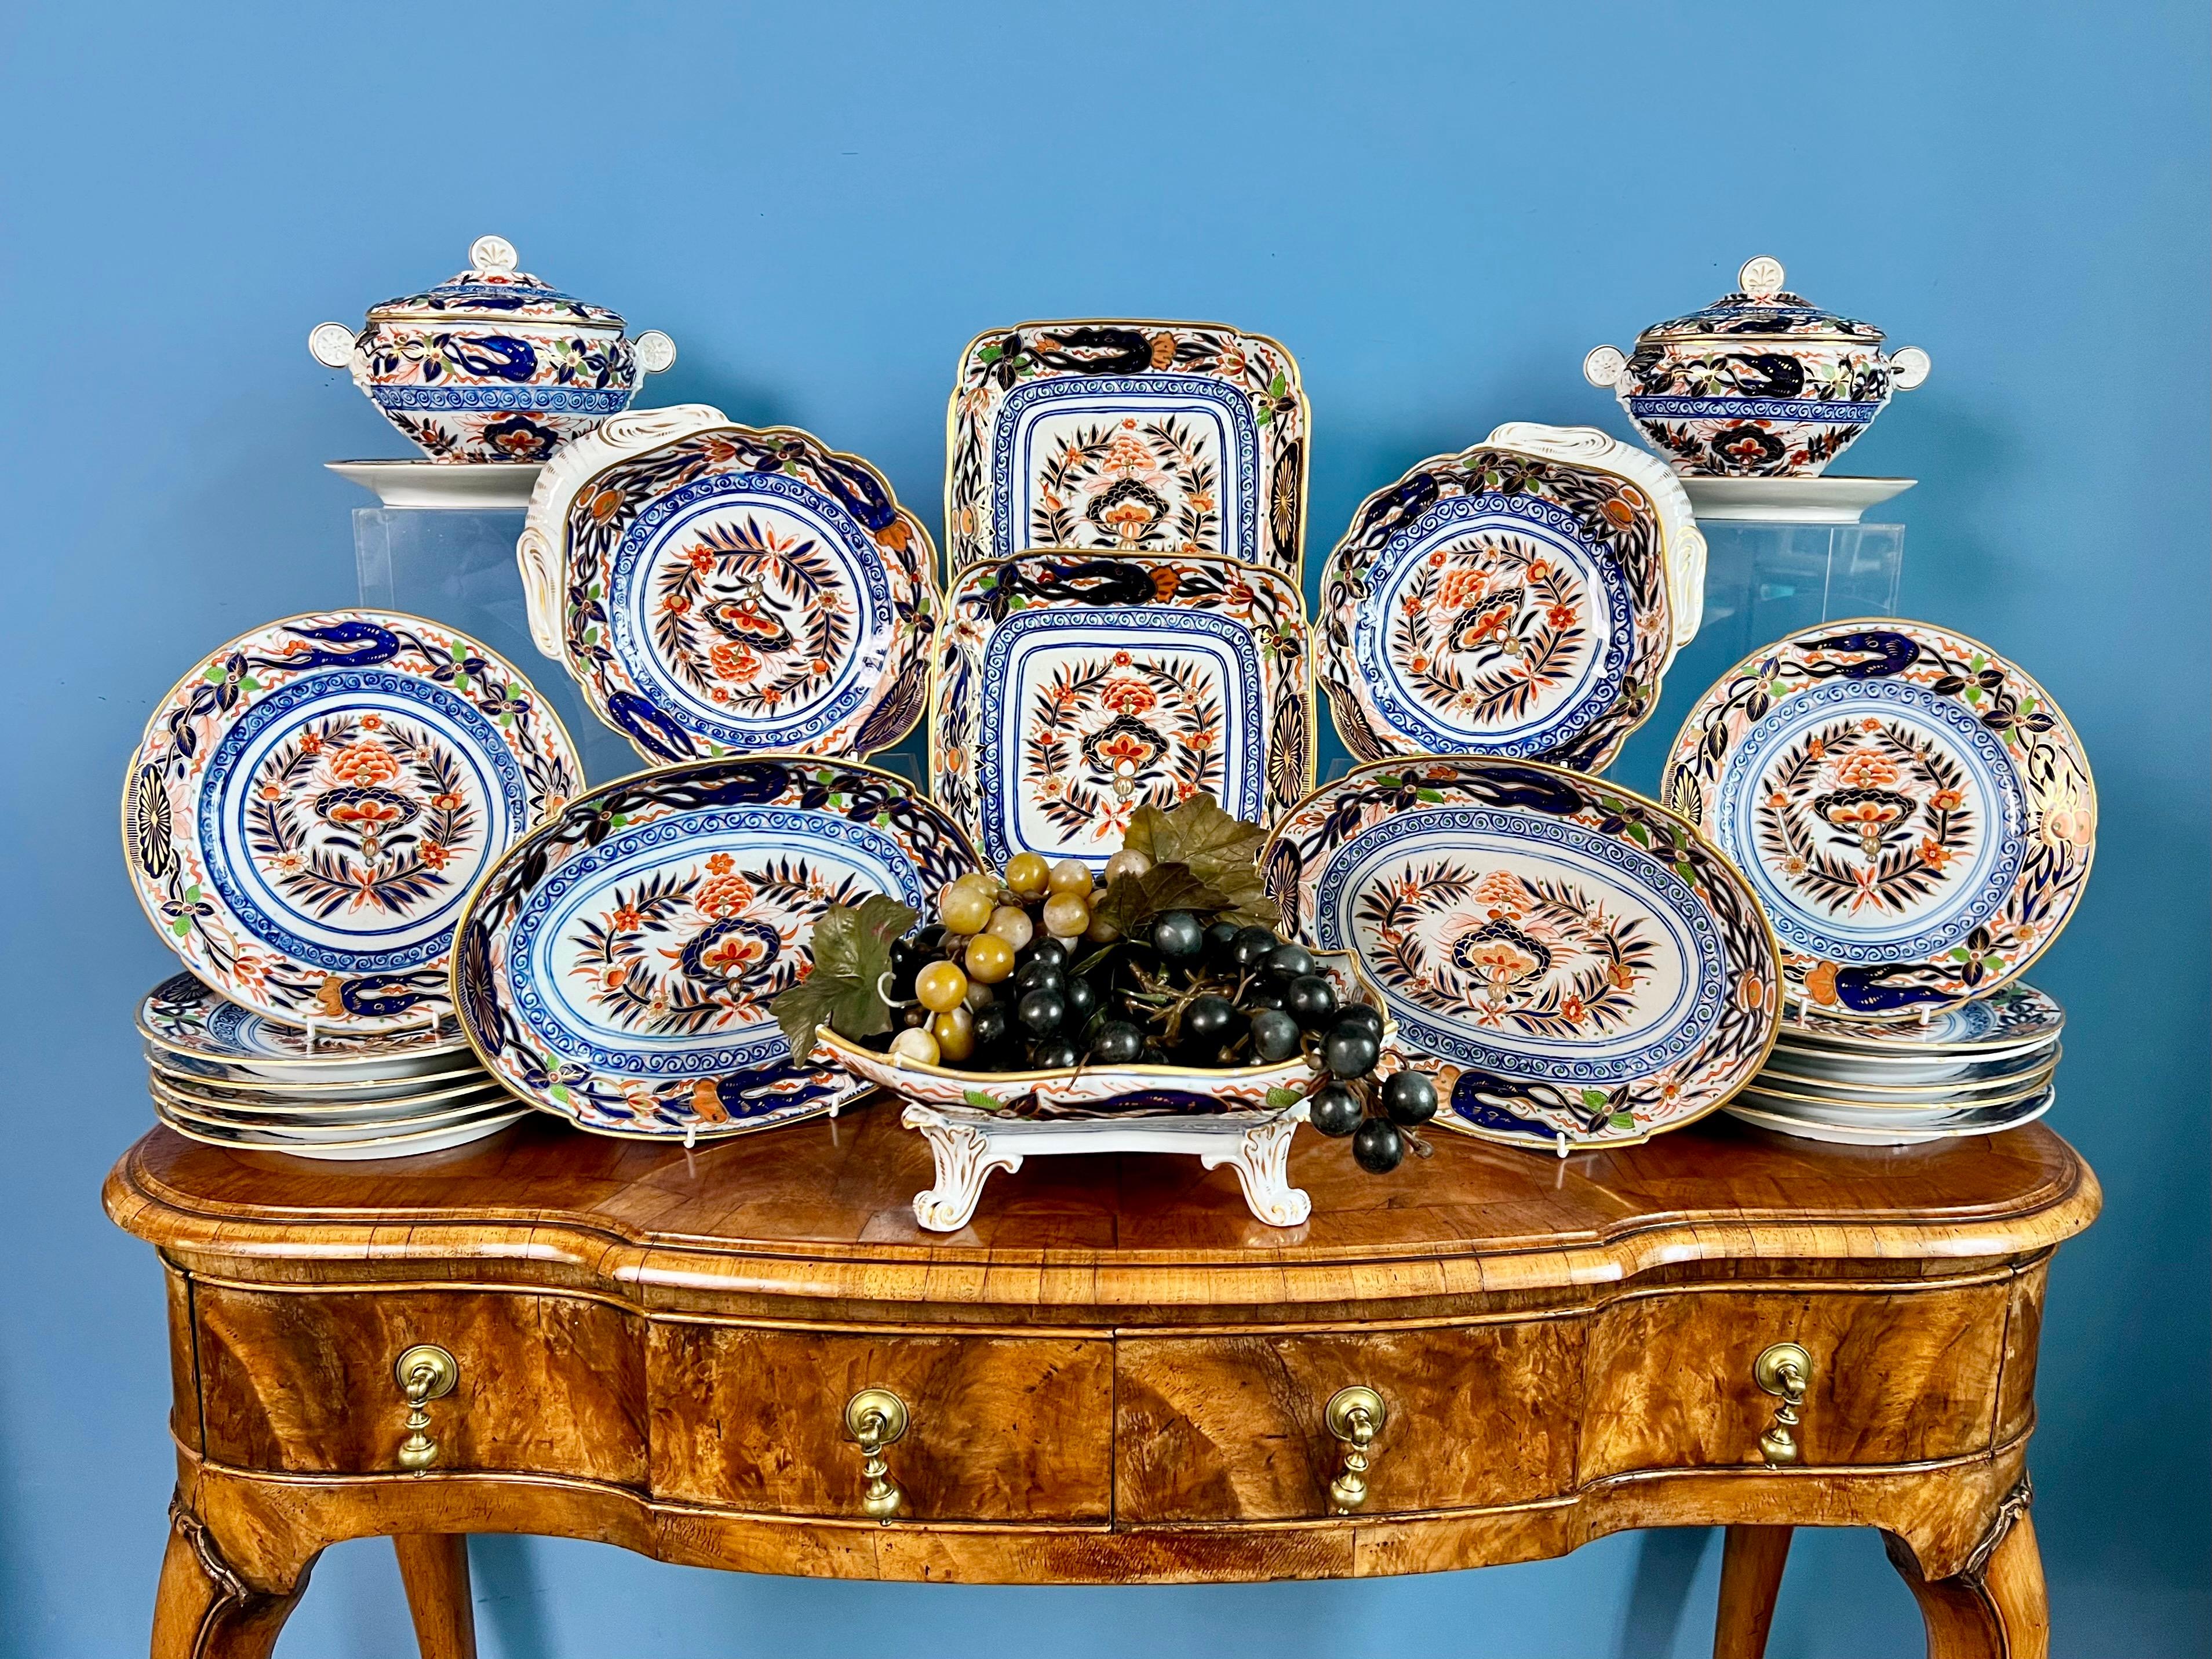 This is a rather stunning 25-piece dessert service made by John Rose at Coalport around the year 1805. It consists a centre piece on four feet, two oval dishes, two shell dishes, two square dishes, two sauce tureens with covers and stands, and